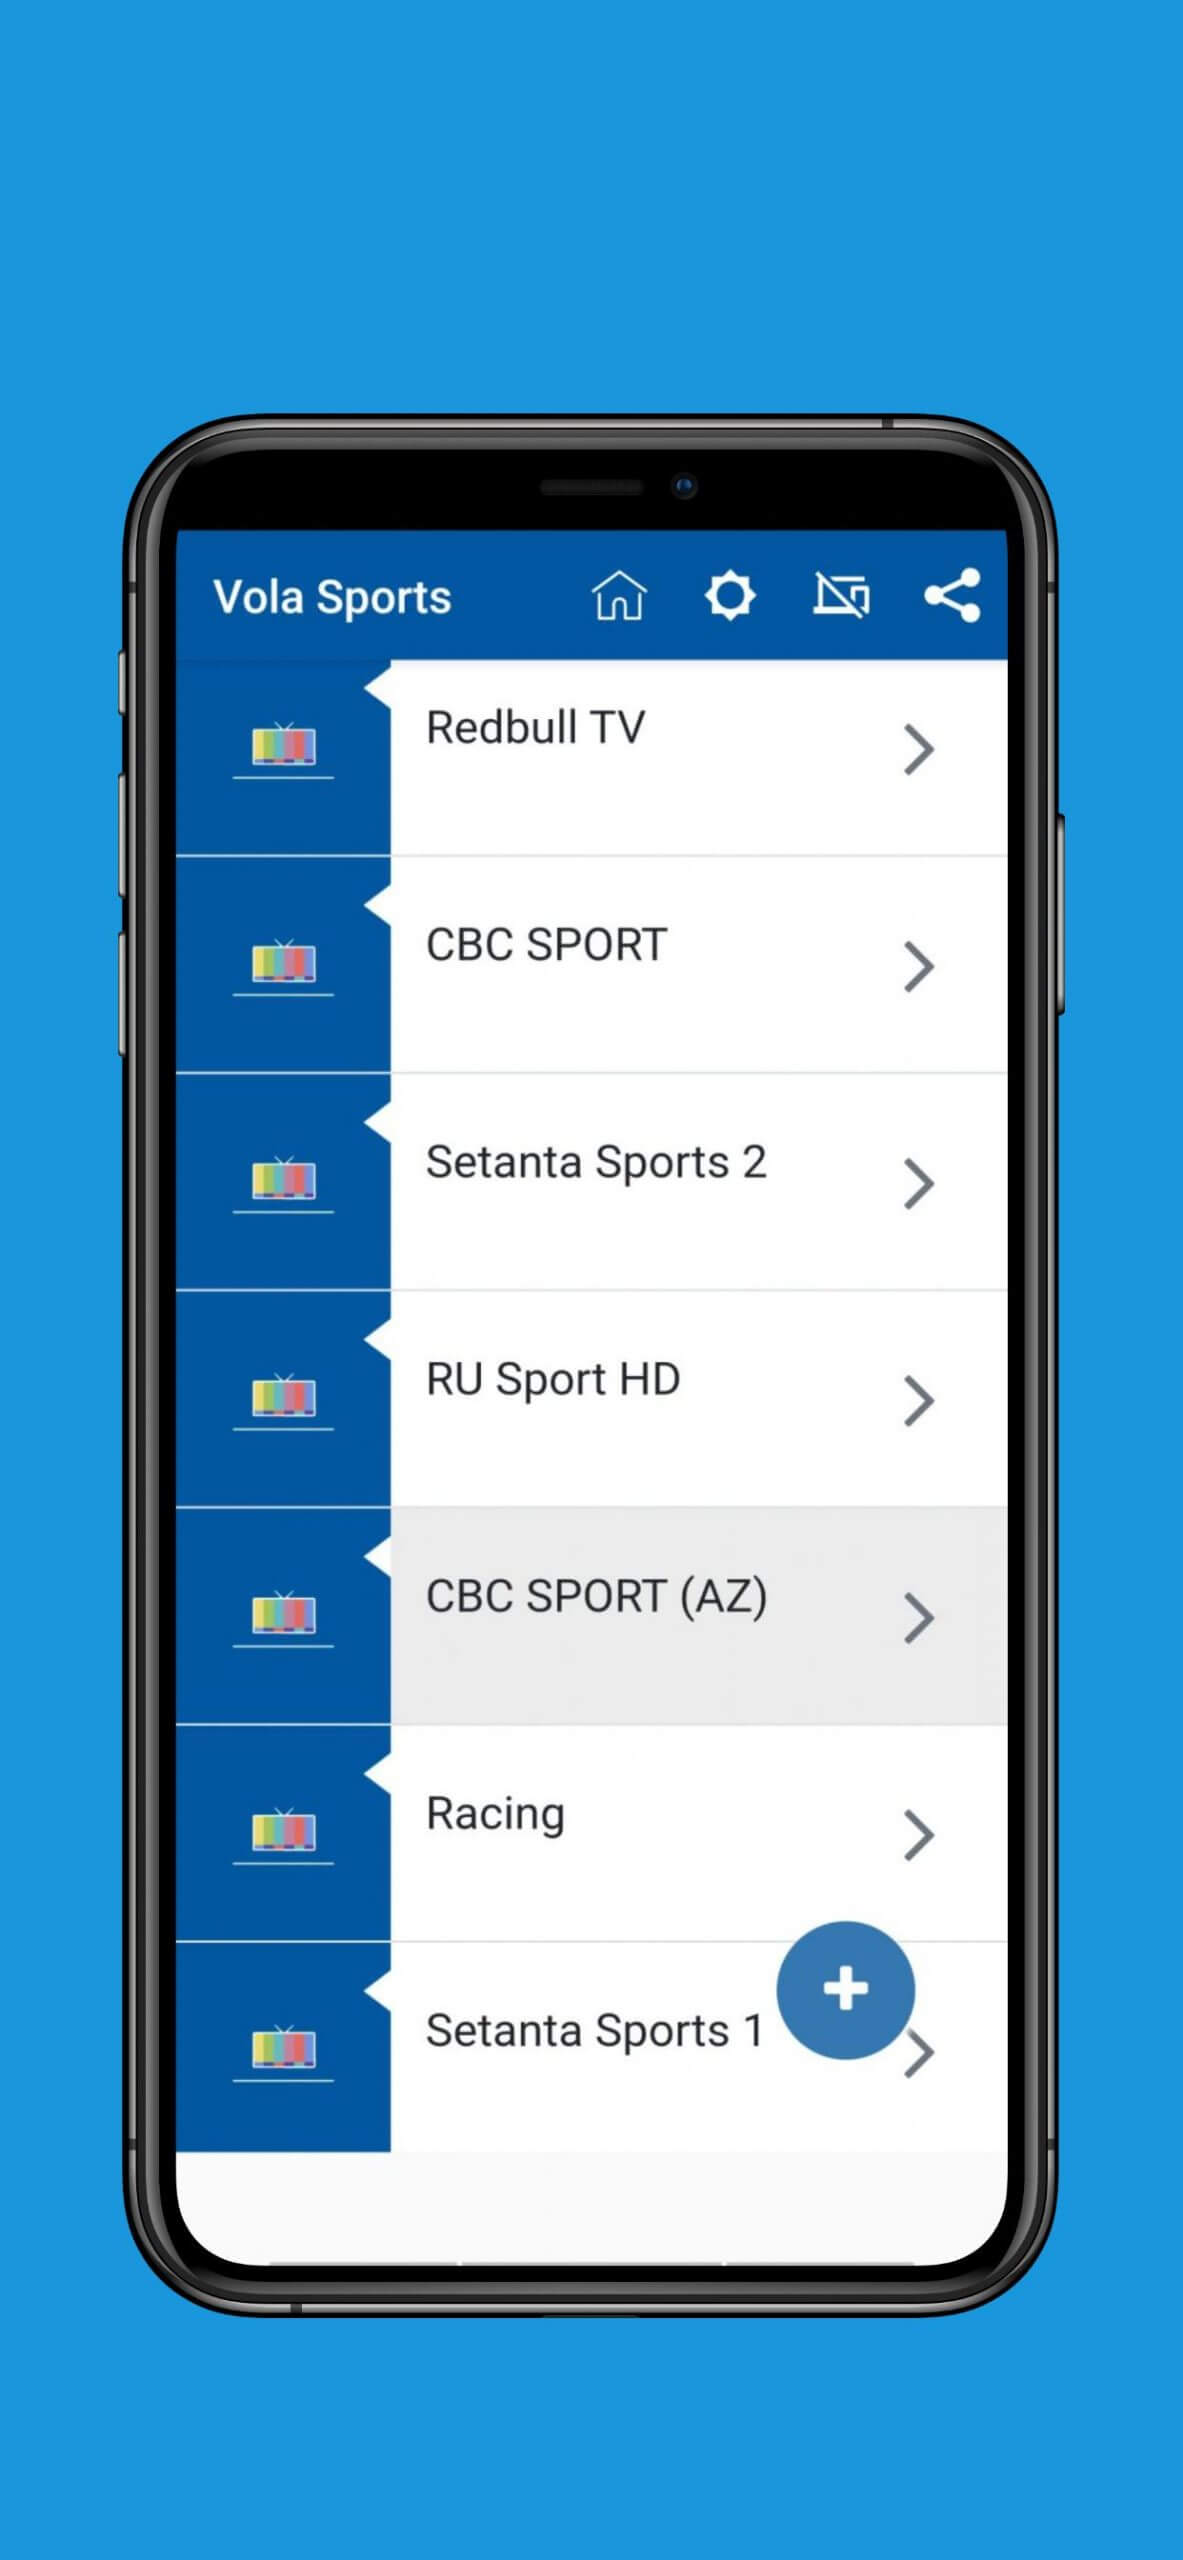 Vola Sports V8 1 1 Apk Mod Ad Free Download For Android